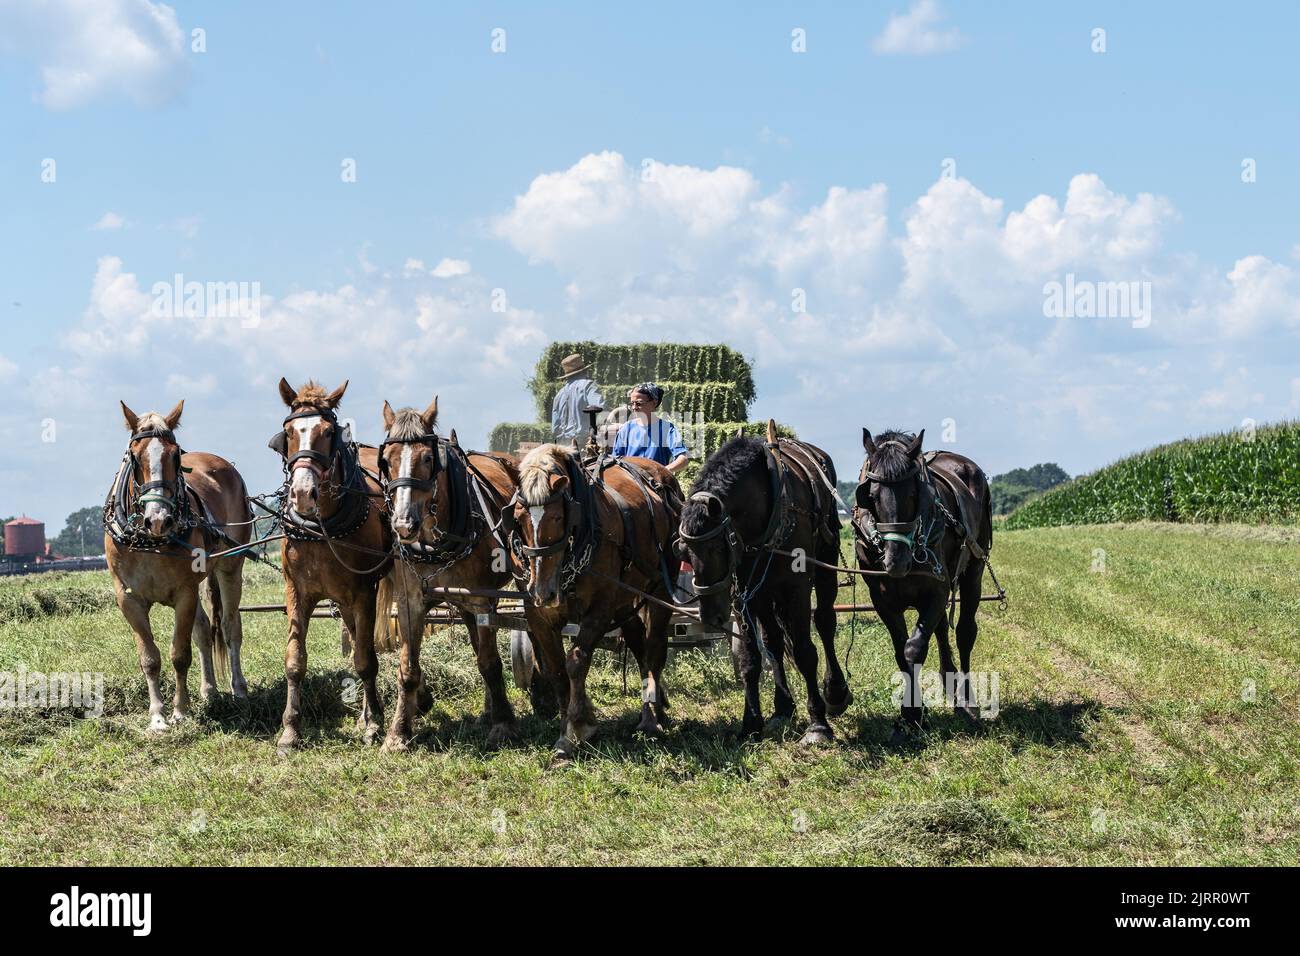 Strasburg, Pennsylvania-August 19, 2022: Amish women and man with horse drawn harvester gather hay bales in farm field Stock Photo